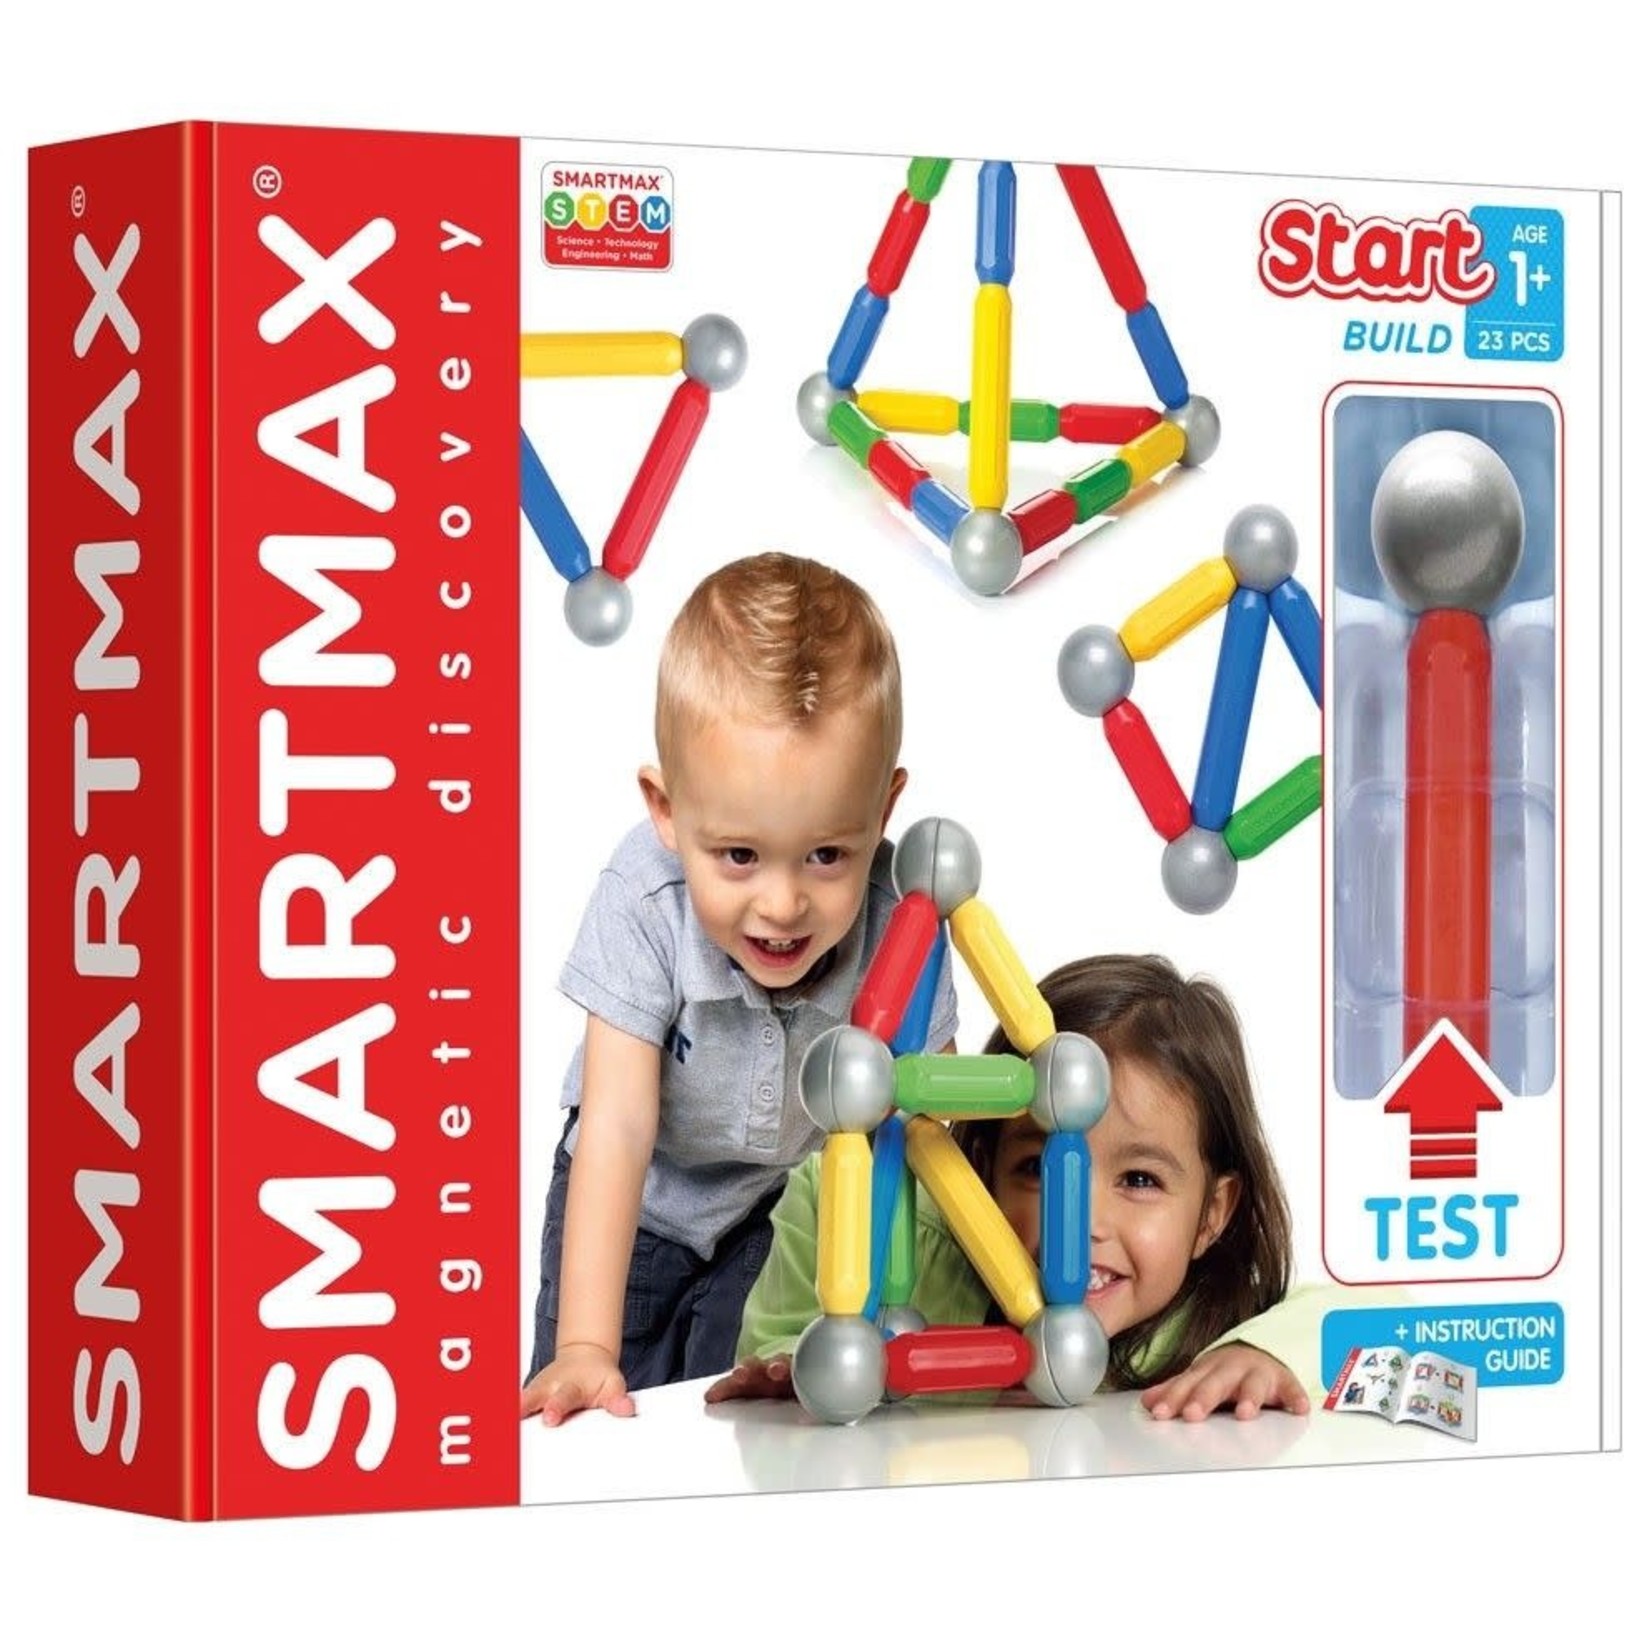 SMART TOYS AND GAMES SMARTMAX START 23 PIECES